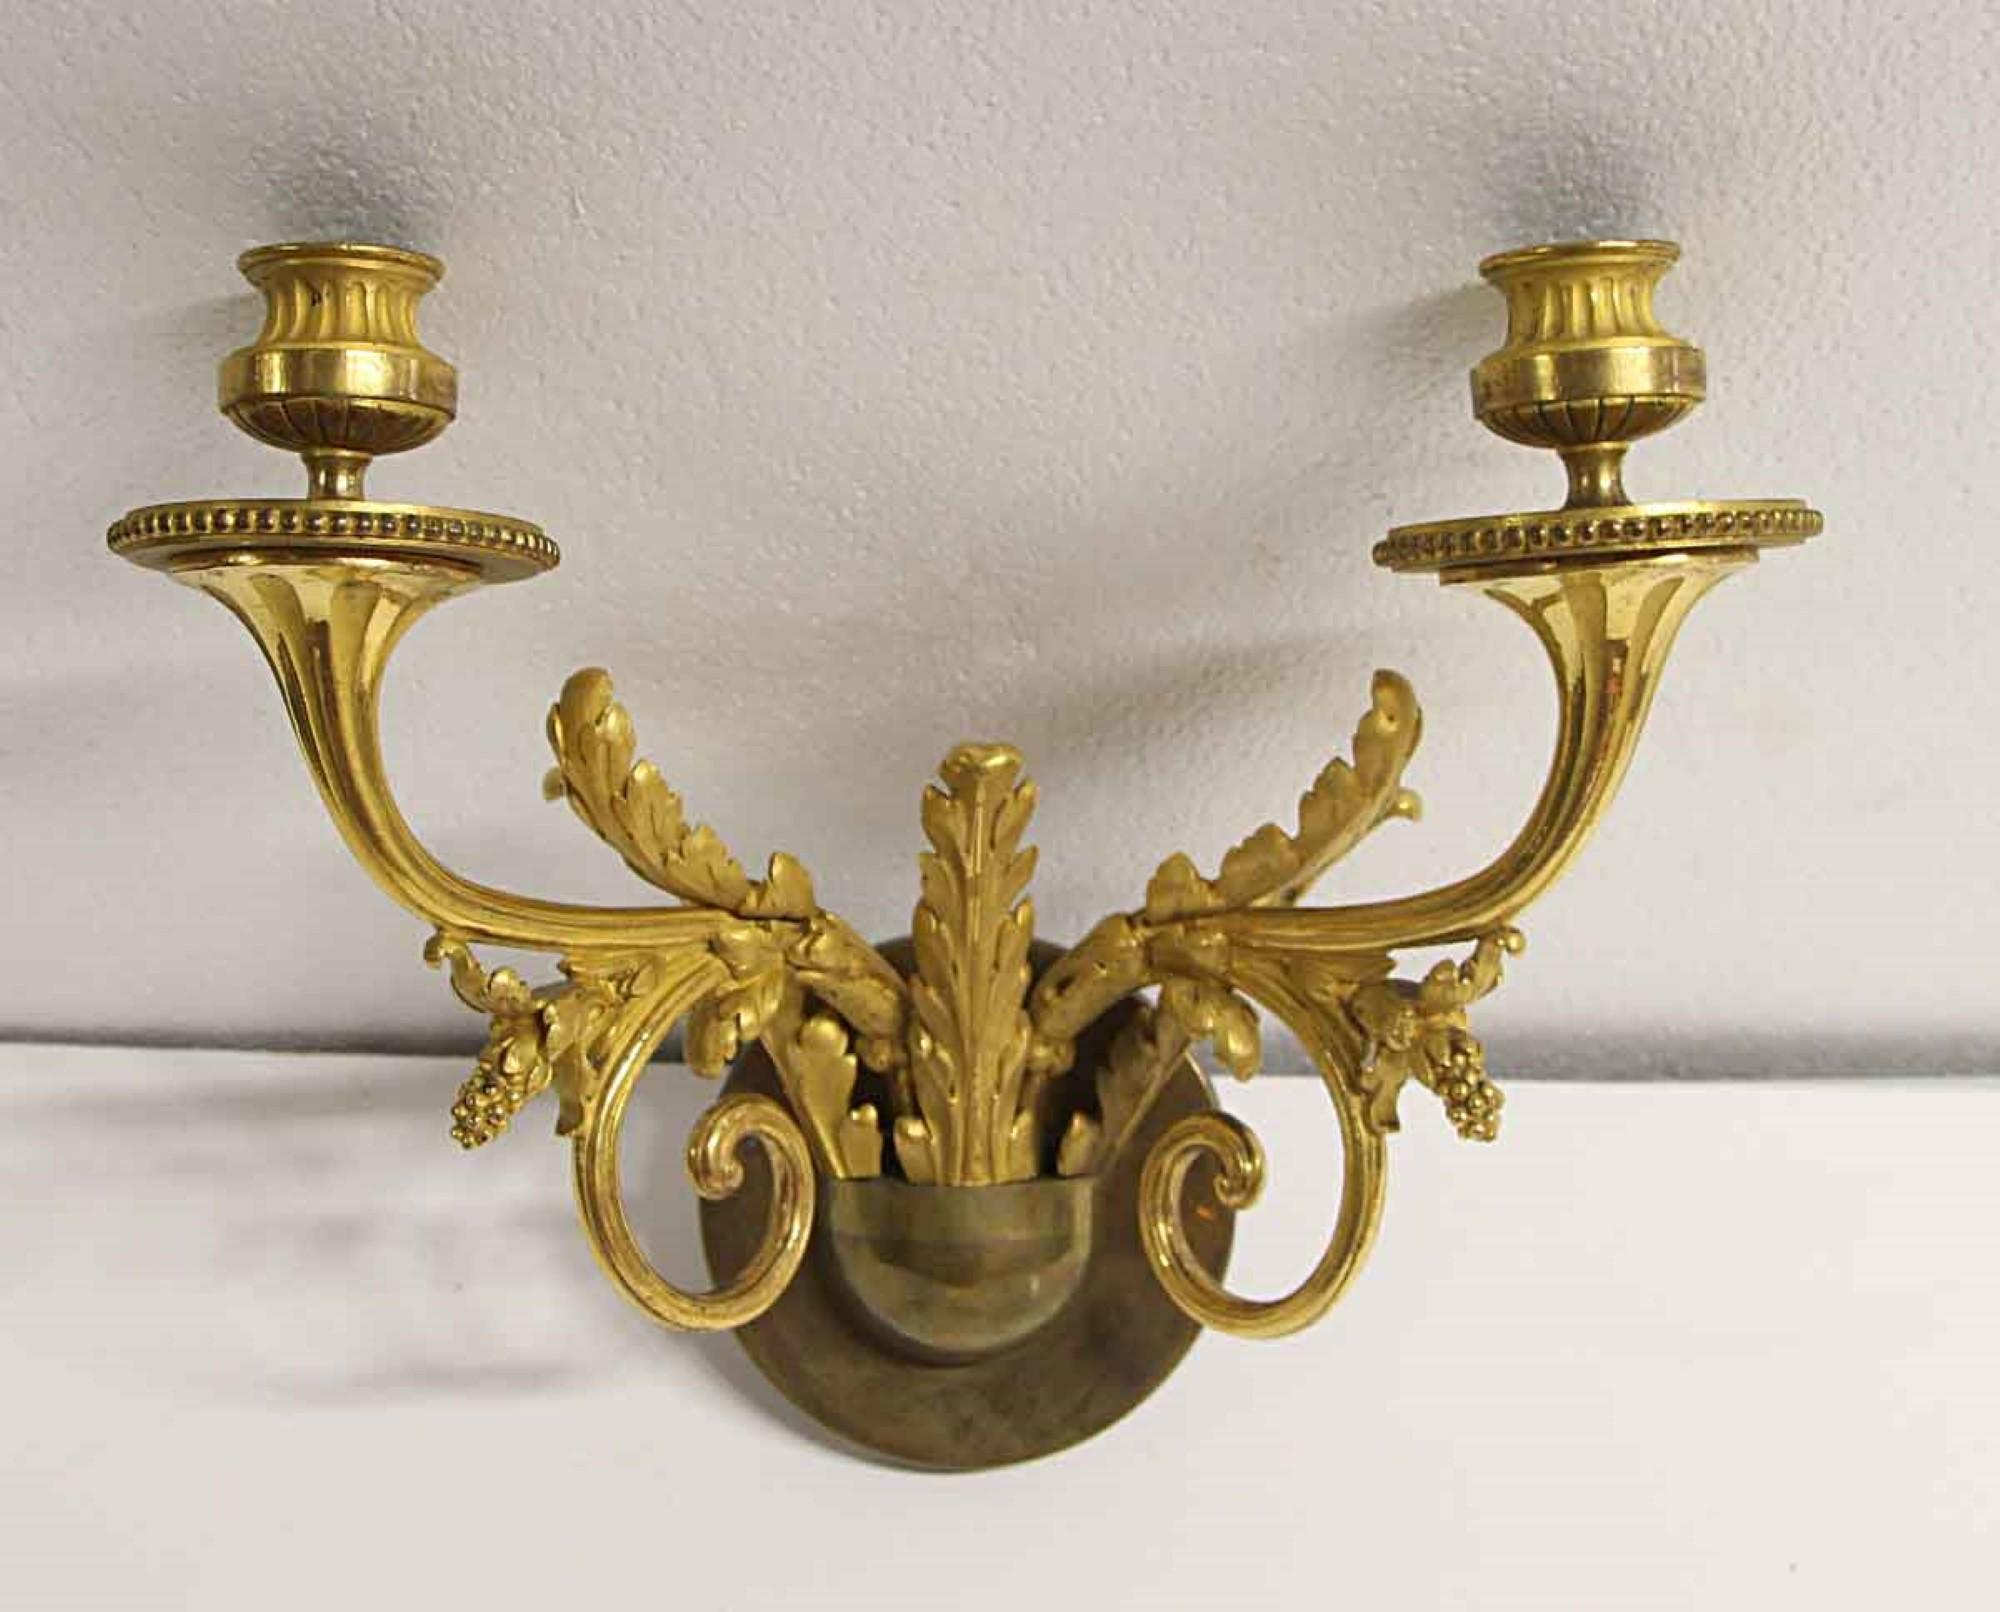 1910s fine detailed brass casting French Empire style sconce with gold filigree. Priced each. This can be seen at our 400 Gilligan St location in Scranton. PA.